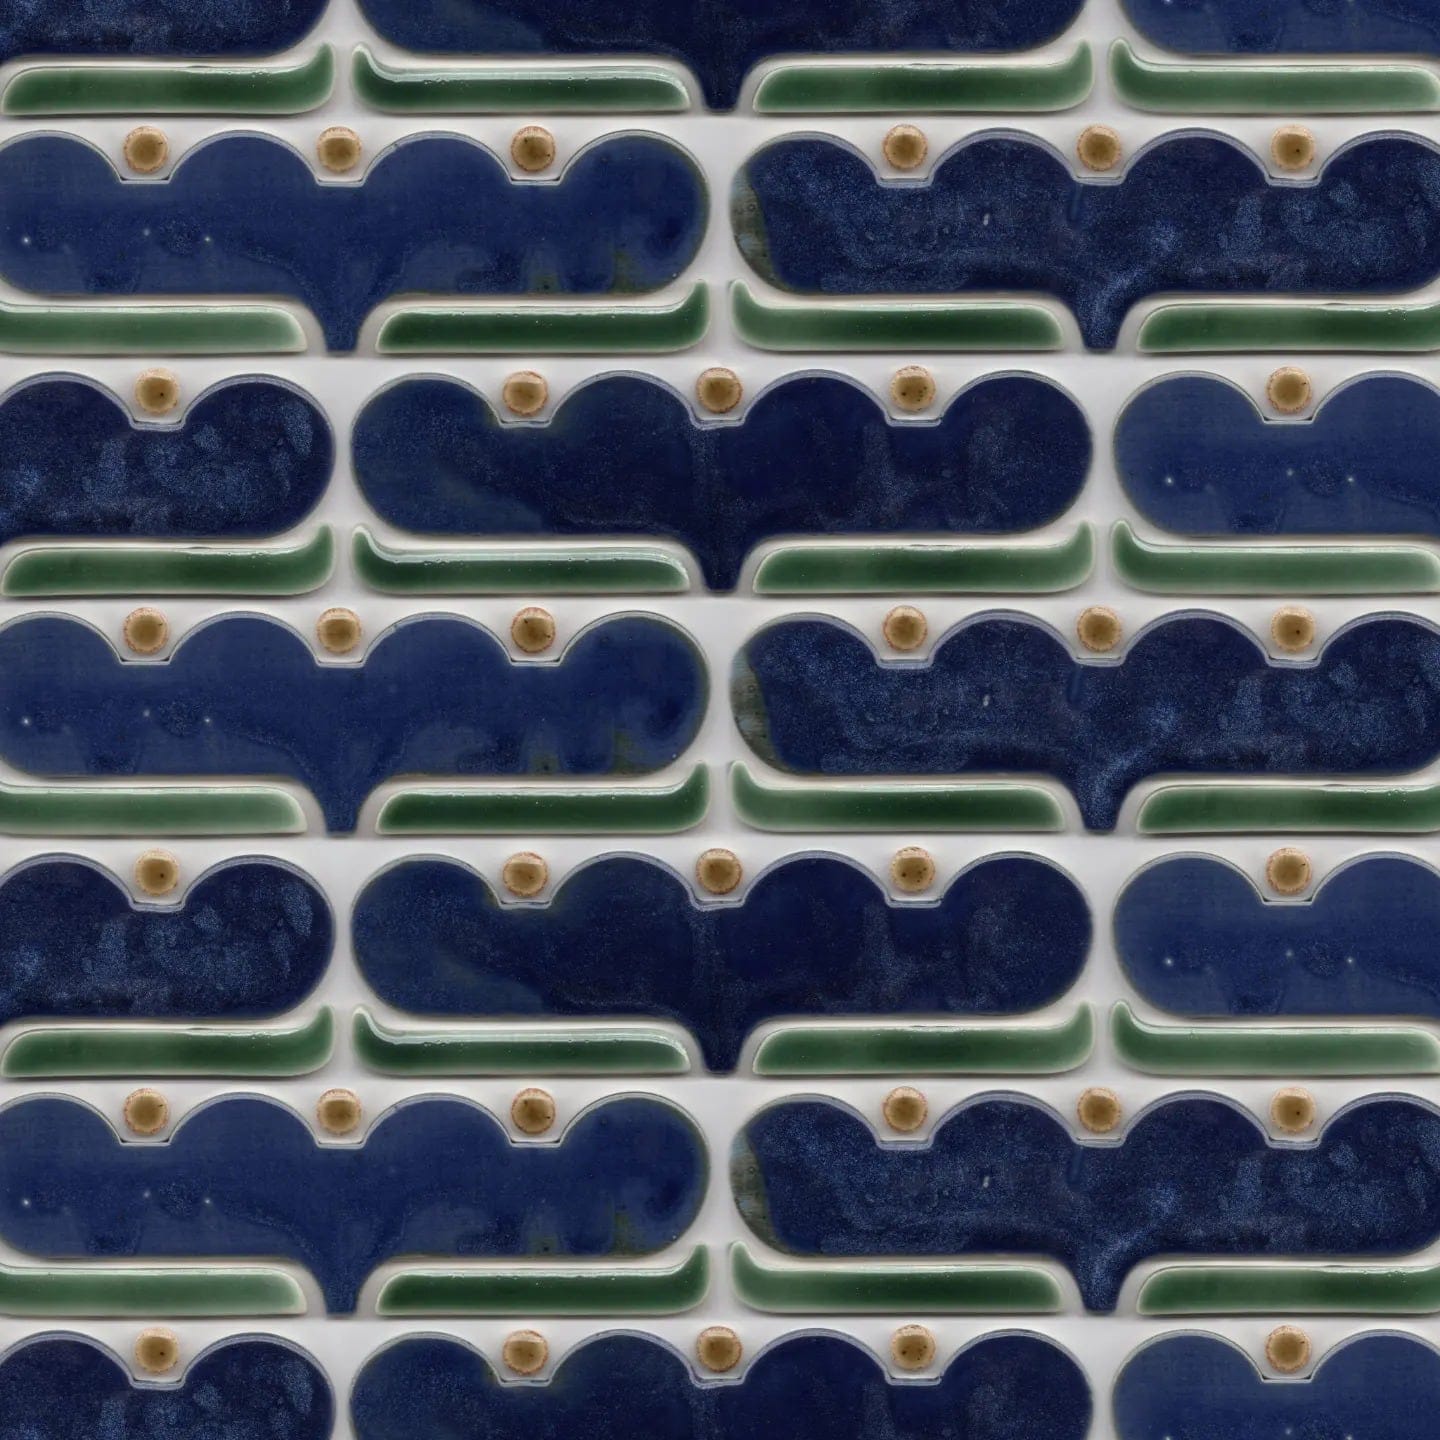 a mass of blue wavy tiles with brown dots in the bottom of the waves and green lines below the blue